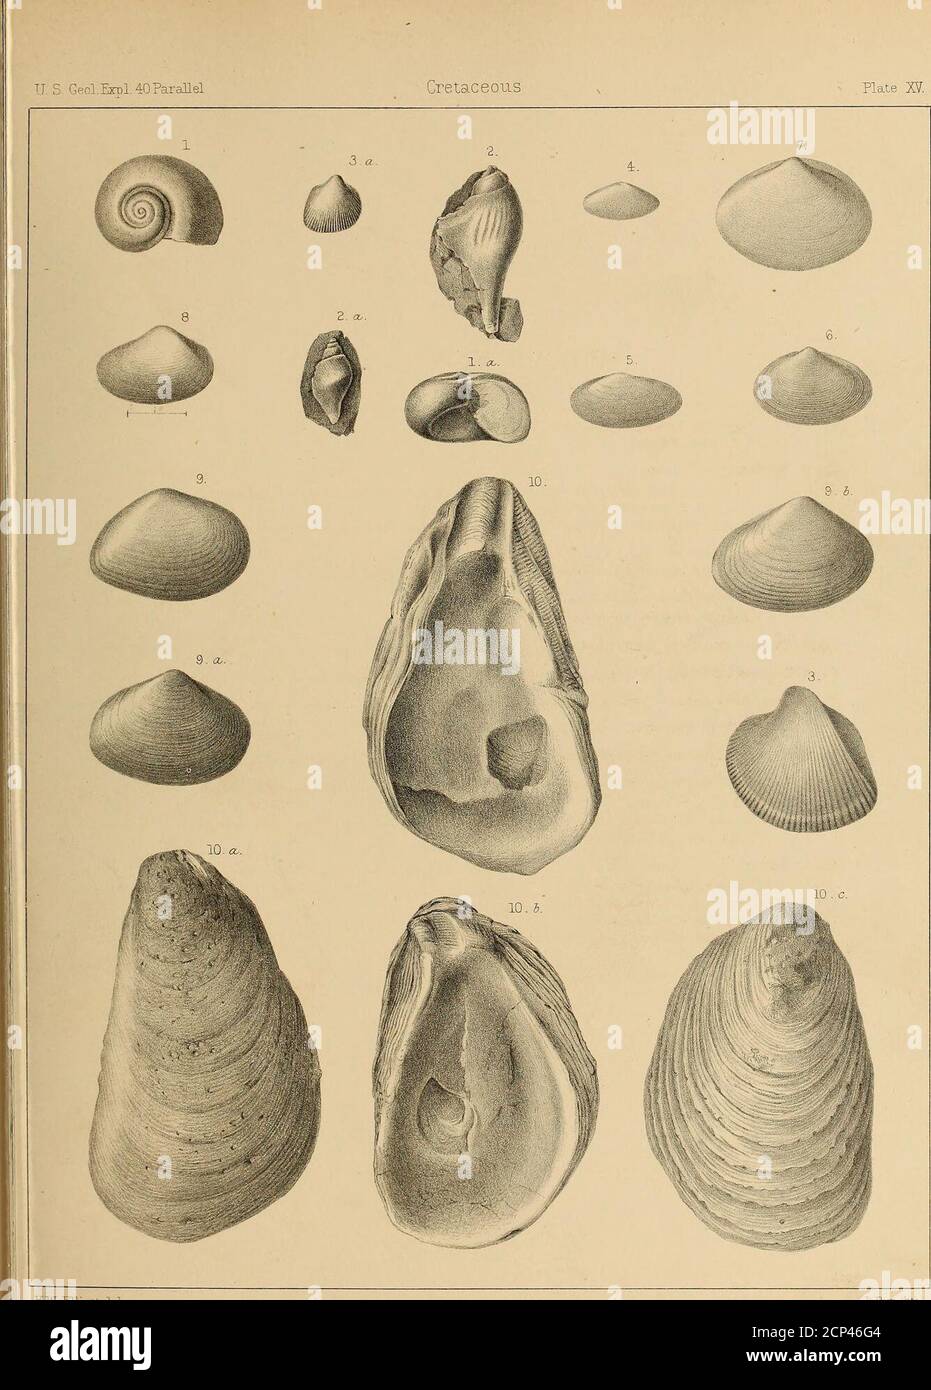 . Report of the Geological exploration of the fortieth parallel . and the outlineof the lip not clearly seen..c i/2a. A smaller specimen, with the lip and the extremity of the canal broken away. Fig. B.^Cardium curtum : ; 151 . r^&lt;j Left view of one of the largest specimens, which is an internal cast. Fig. Sfa. Cardidm subcurtum 152 fS-- • A small specimen, right side view. Fig. 4. Tellina MODESTA. Cast of left valve . 157 V Fig. 5. Tellina ? modesta. Cast of a larger left valve, possibly of this species 157 Fig. 6. Tellina? isonema. Left view of a cast of exterior 156 vFifi^.Cyprimeria? s Stock Photo